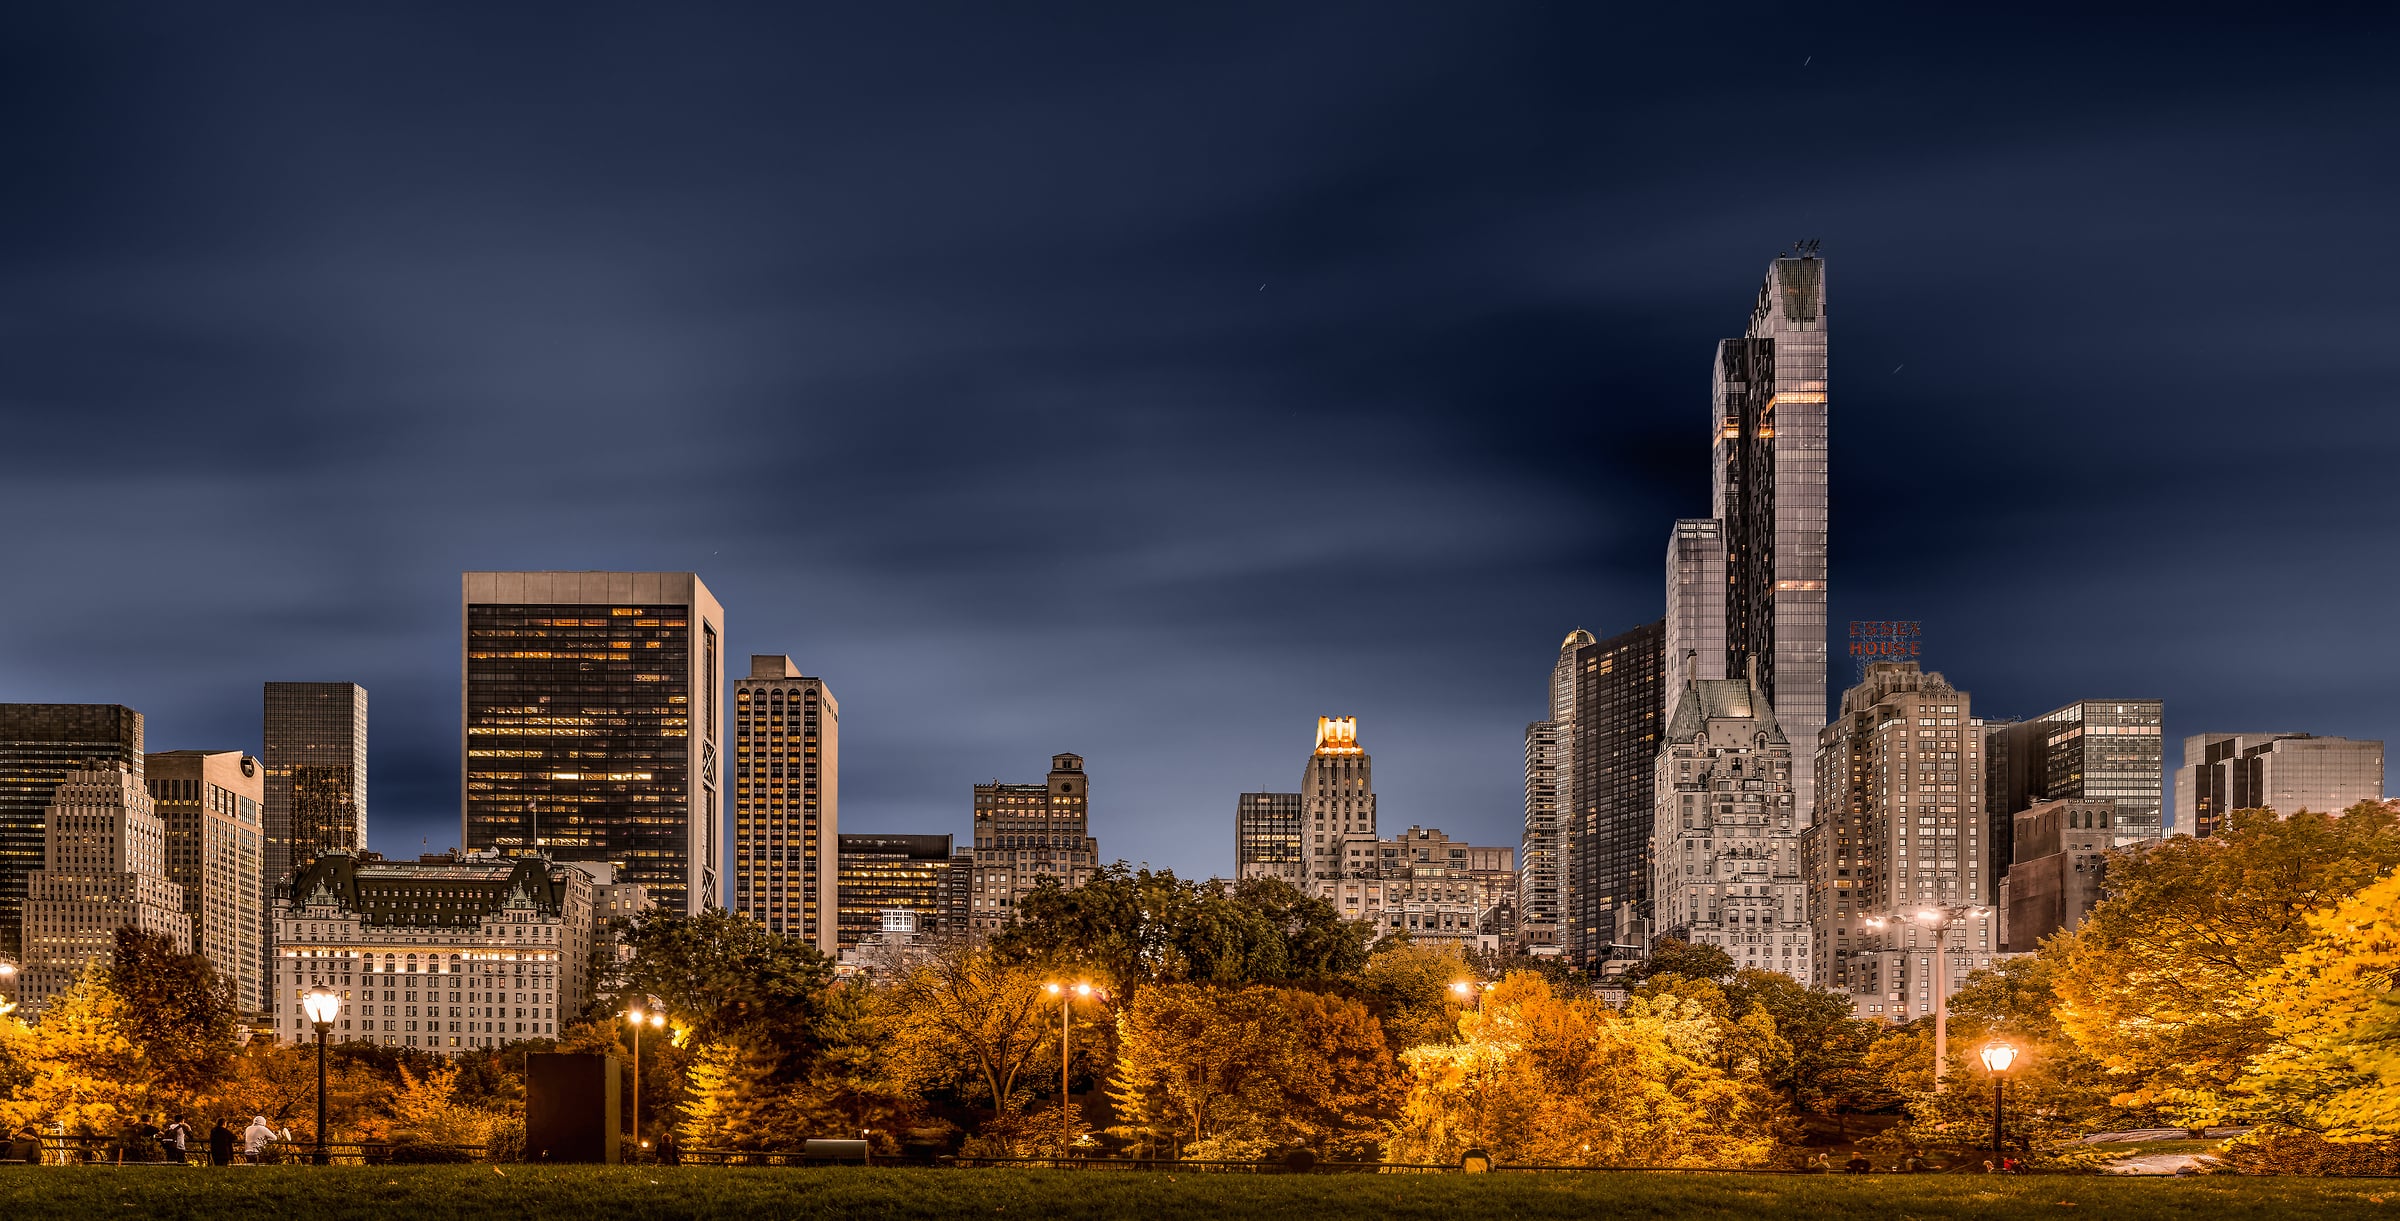 160 megapixels! A very high resolution cityscape VAST photo of the Billionaires' Row skyline in Midtown Manhattan from Central Park in autumn at night; created in New York City by Dan Piech.